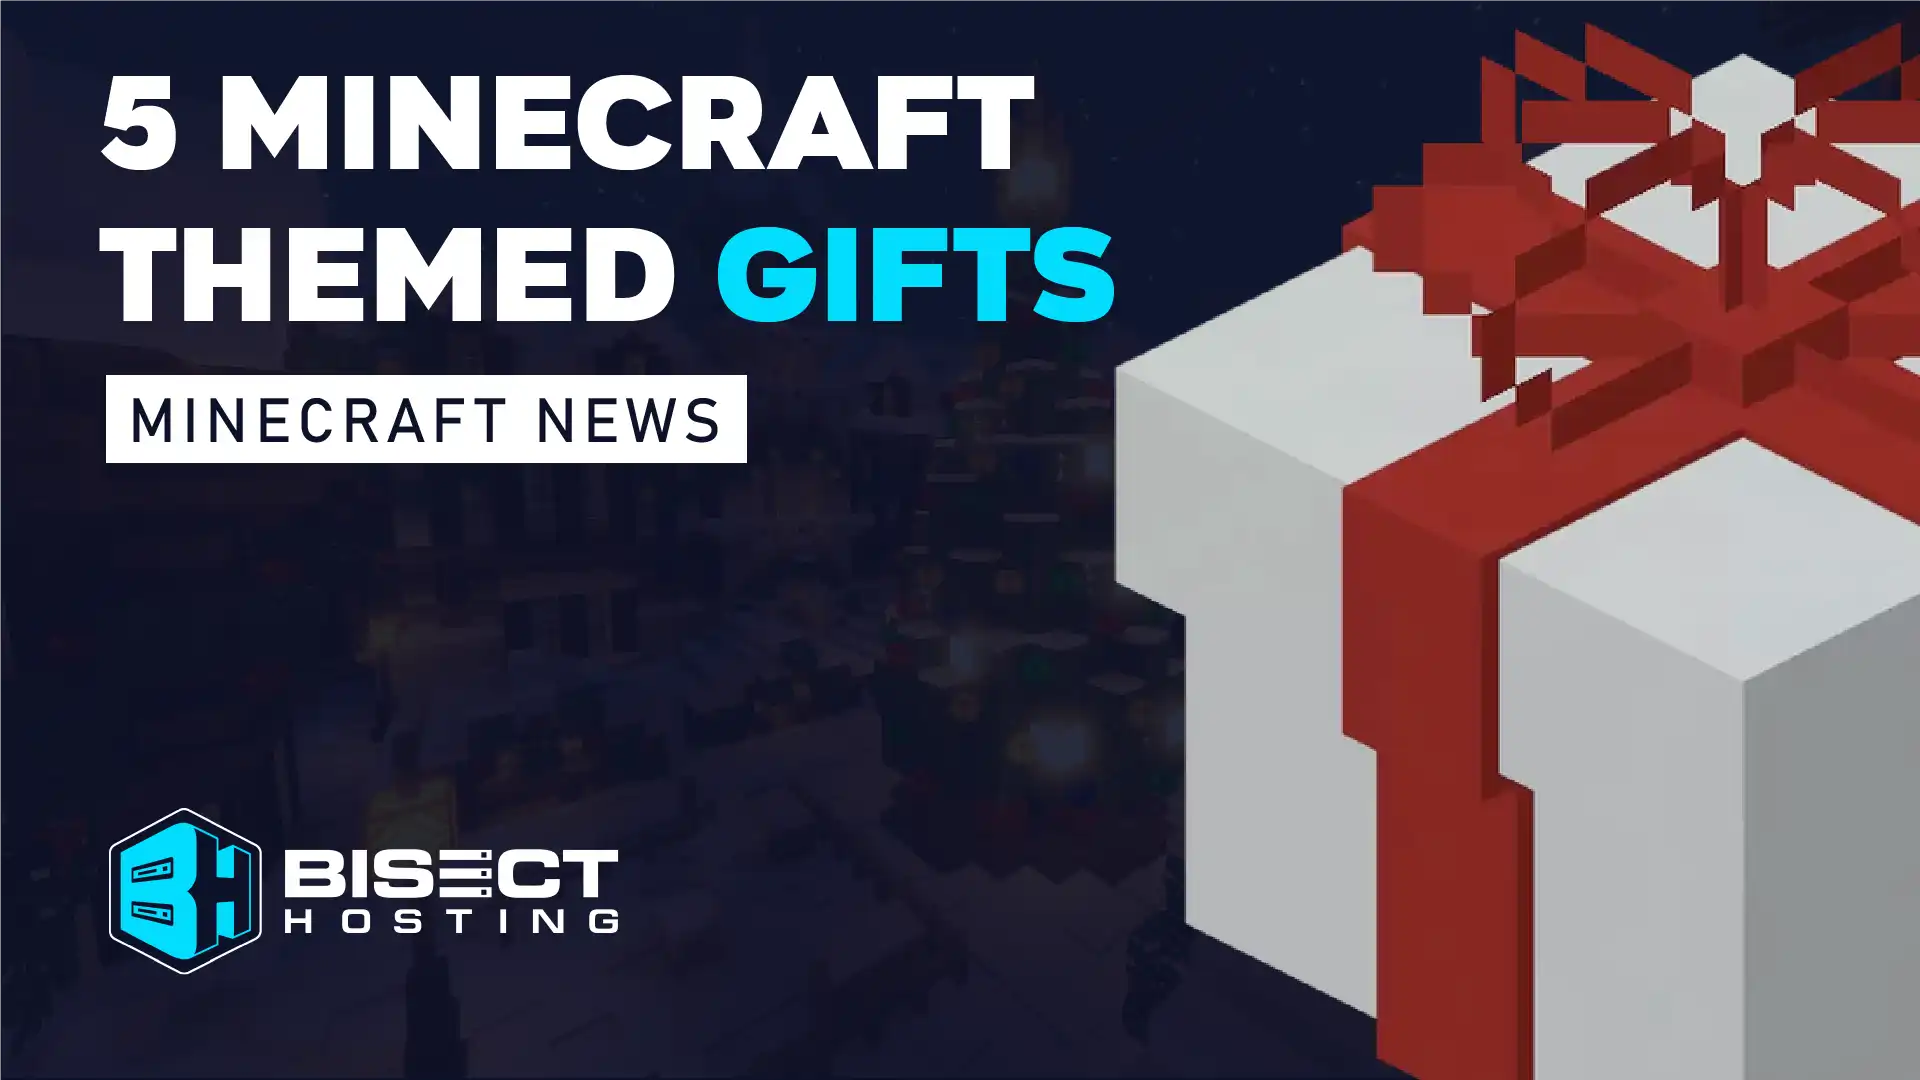 5 Minecraft Themed Gifts for The Holiday Season